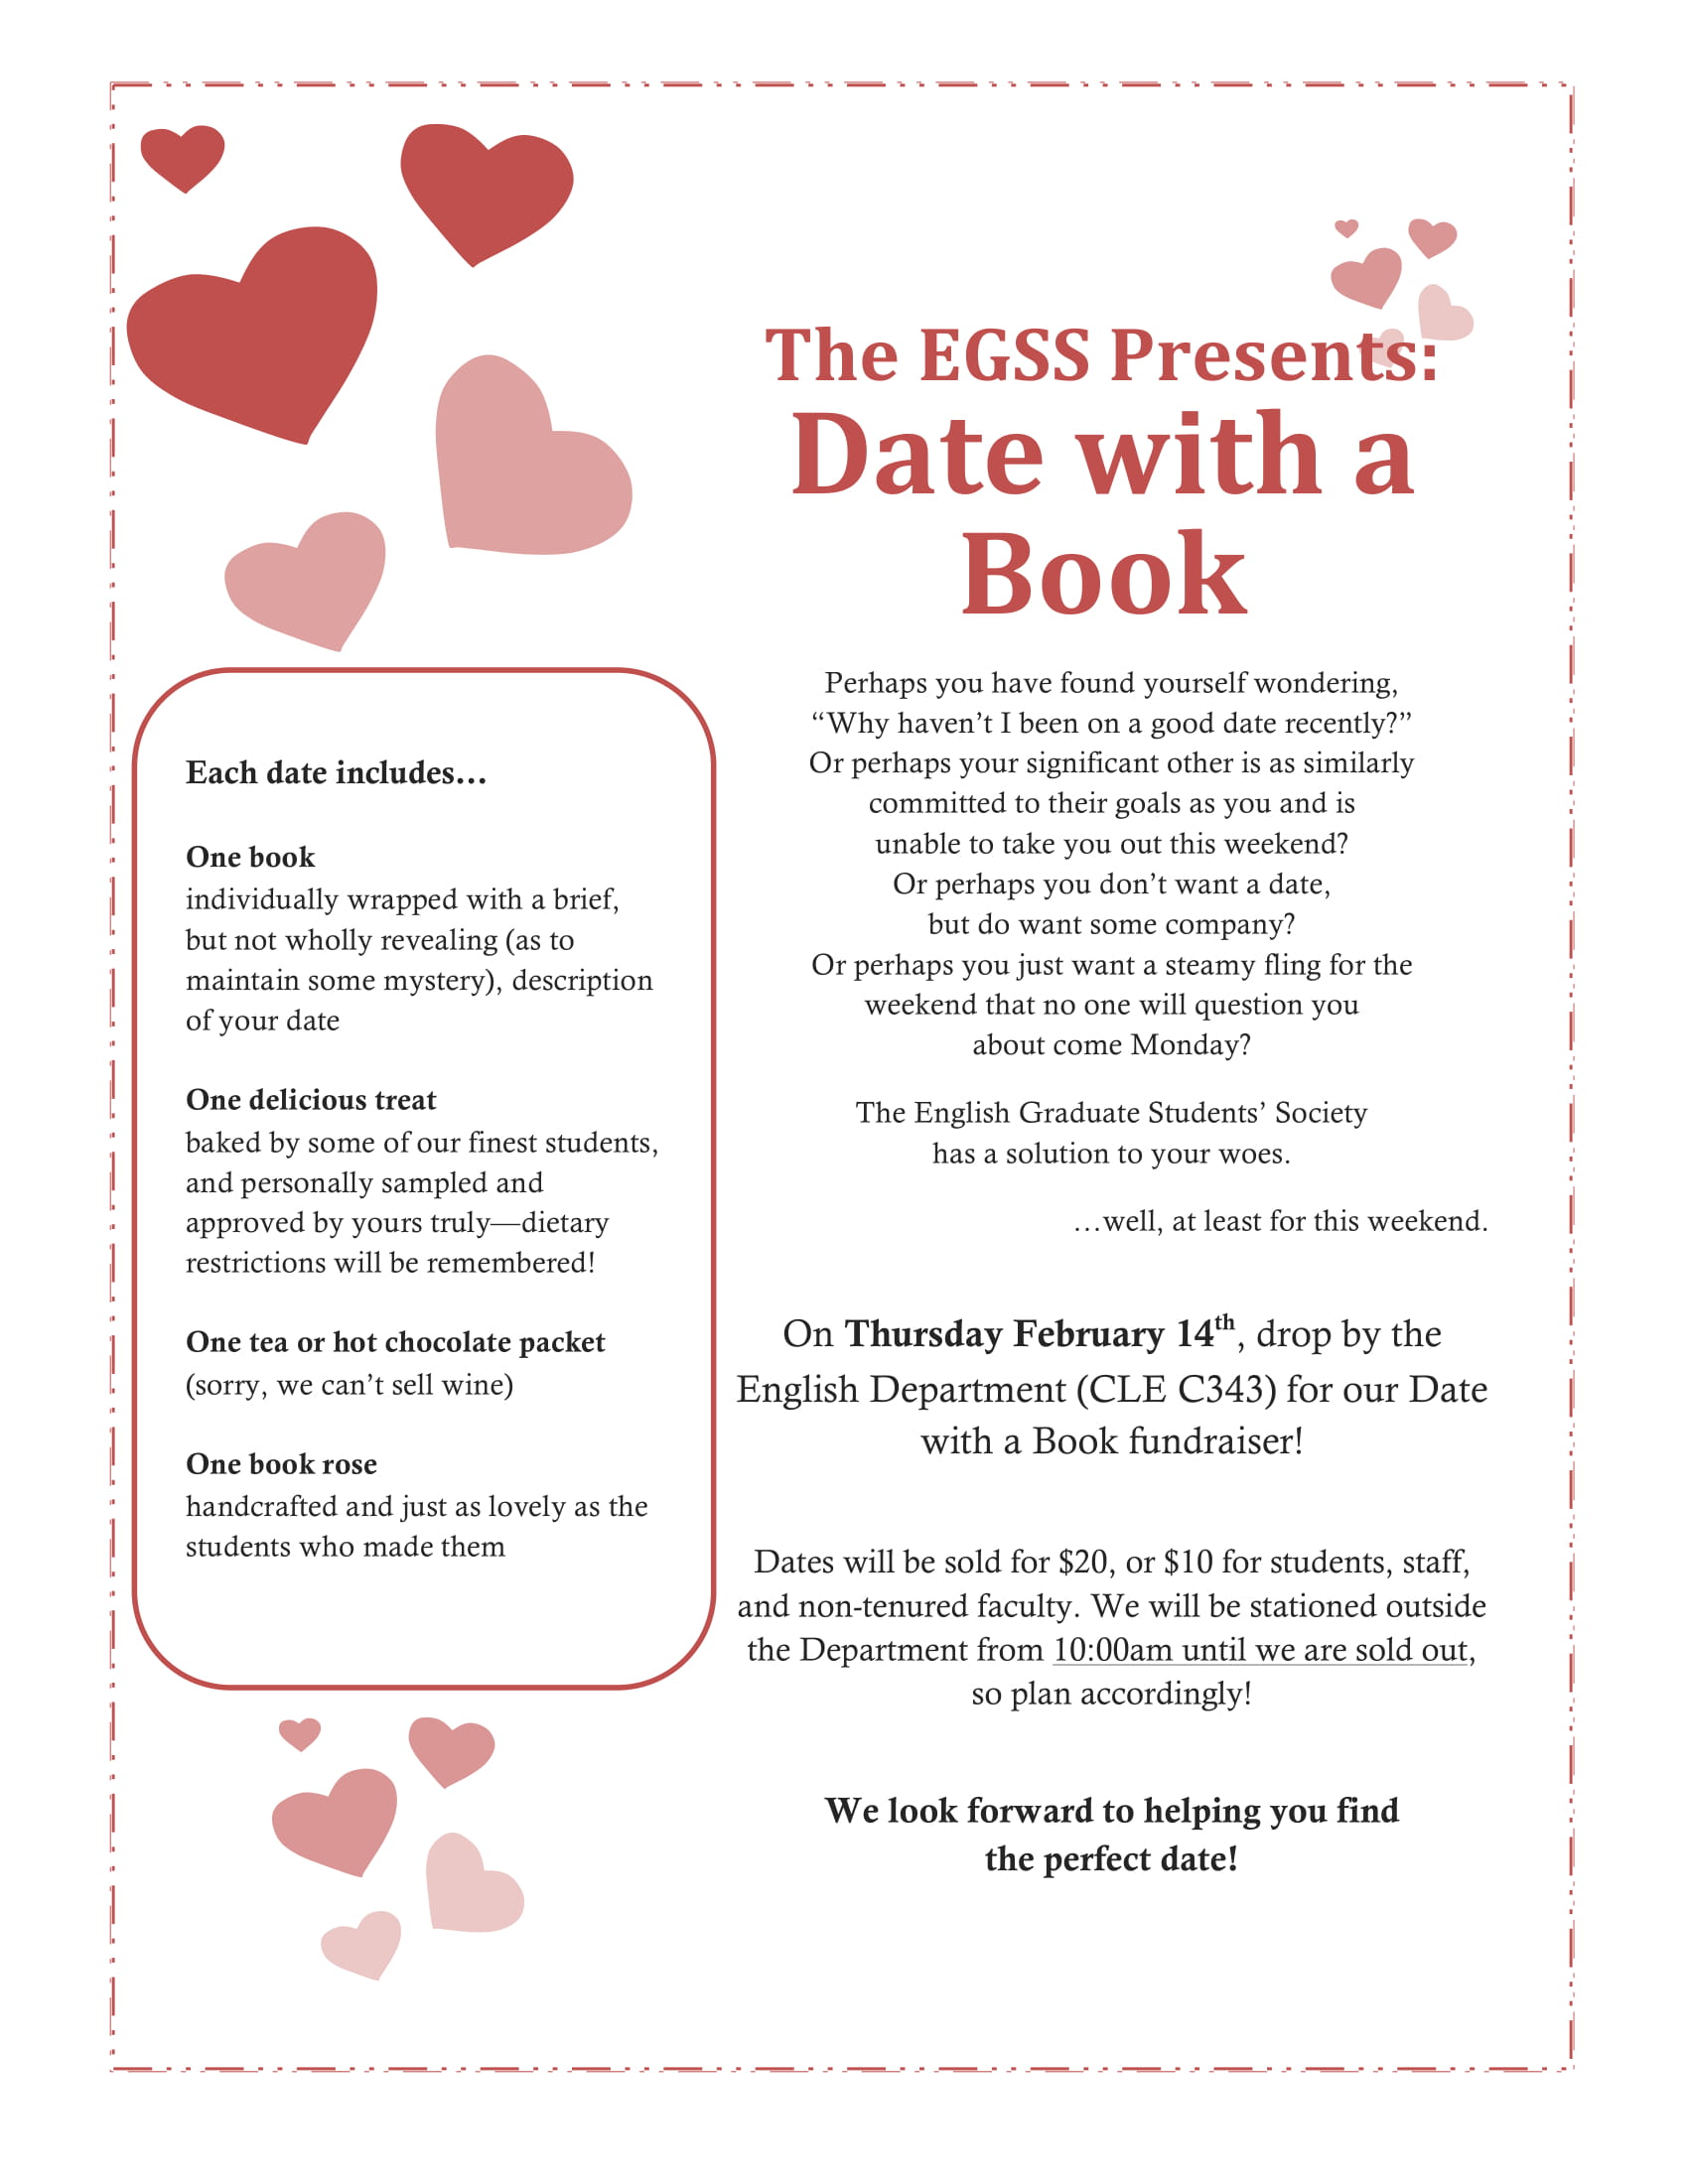 egss-date-with-a-book